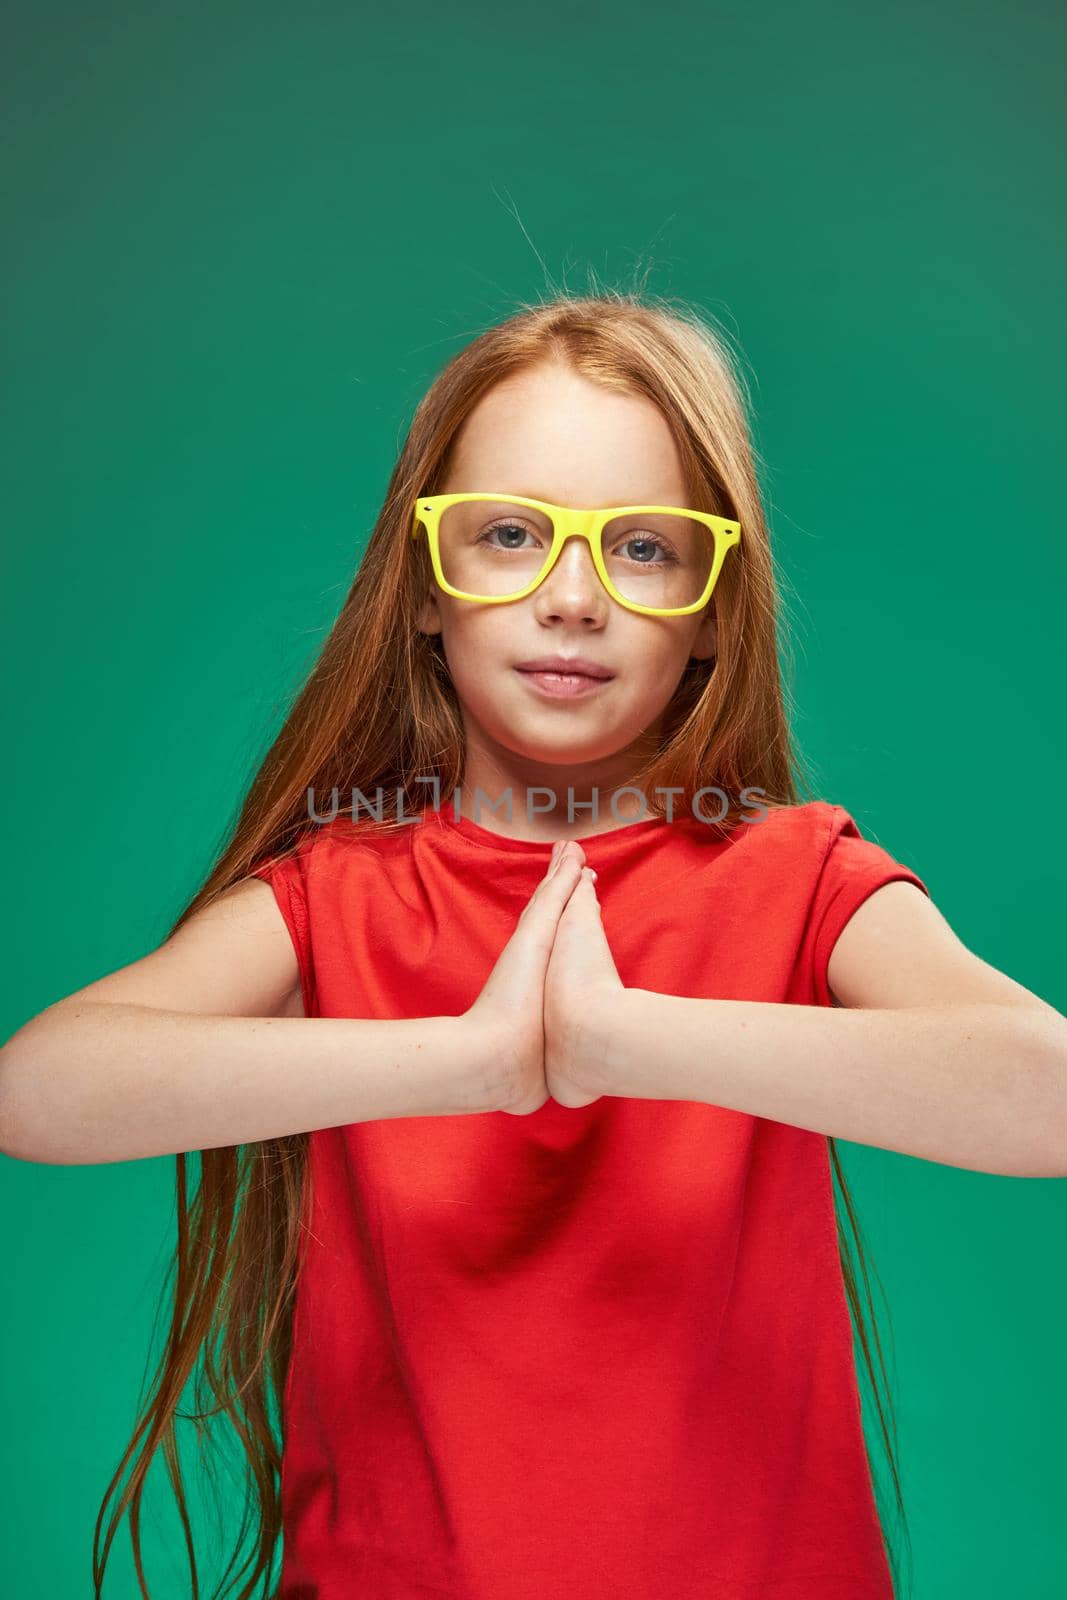 redhead girl with yellow glasses gesturing with her hands childhood learning Green background. High quality photo